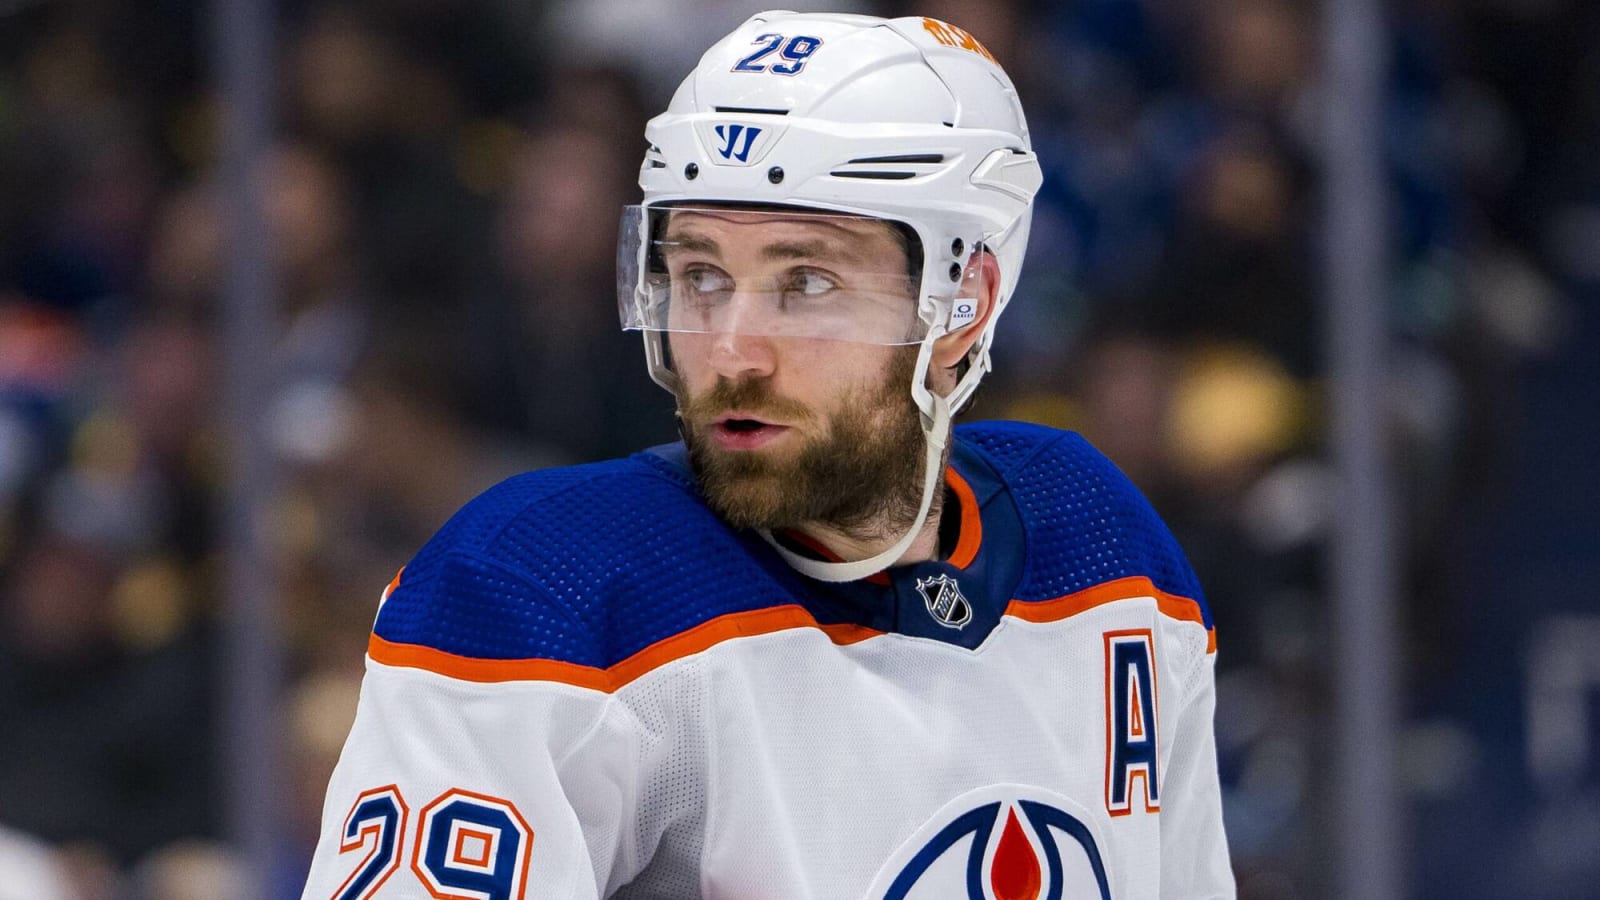 Oilers’ Draisaitl becomes third-fastest player to hit 100 career playoff points